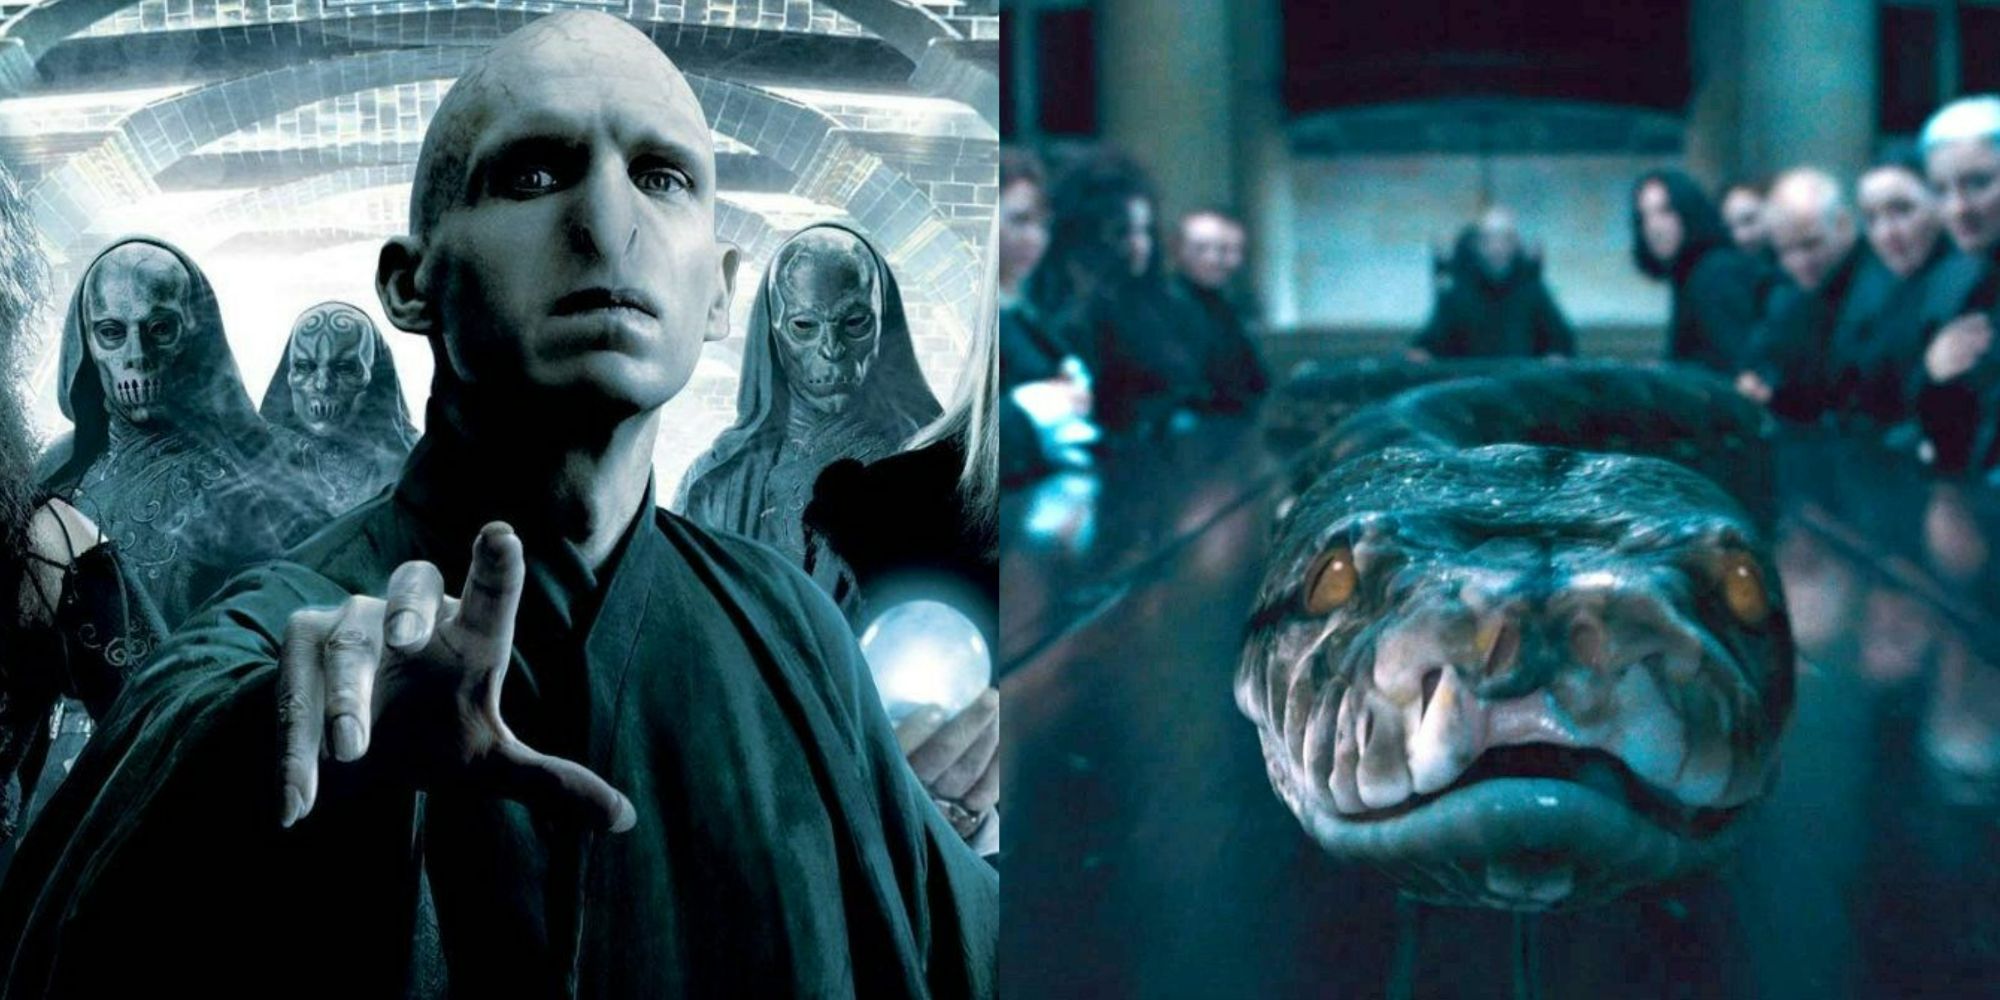 A split image of Voldemort on the left and Nagini on the right from Harry Potter. 